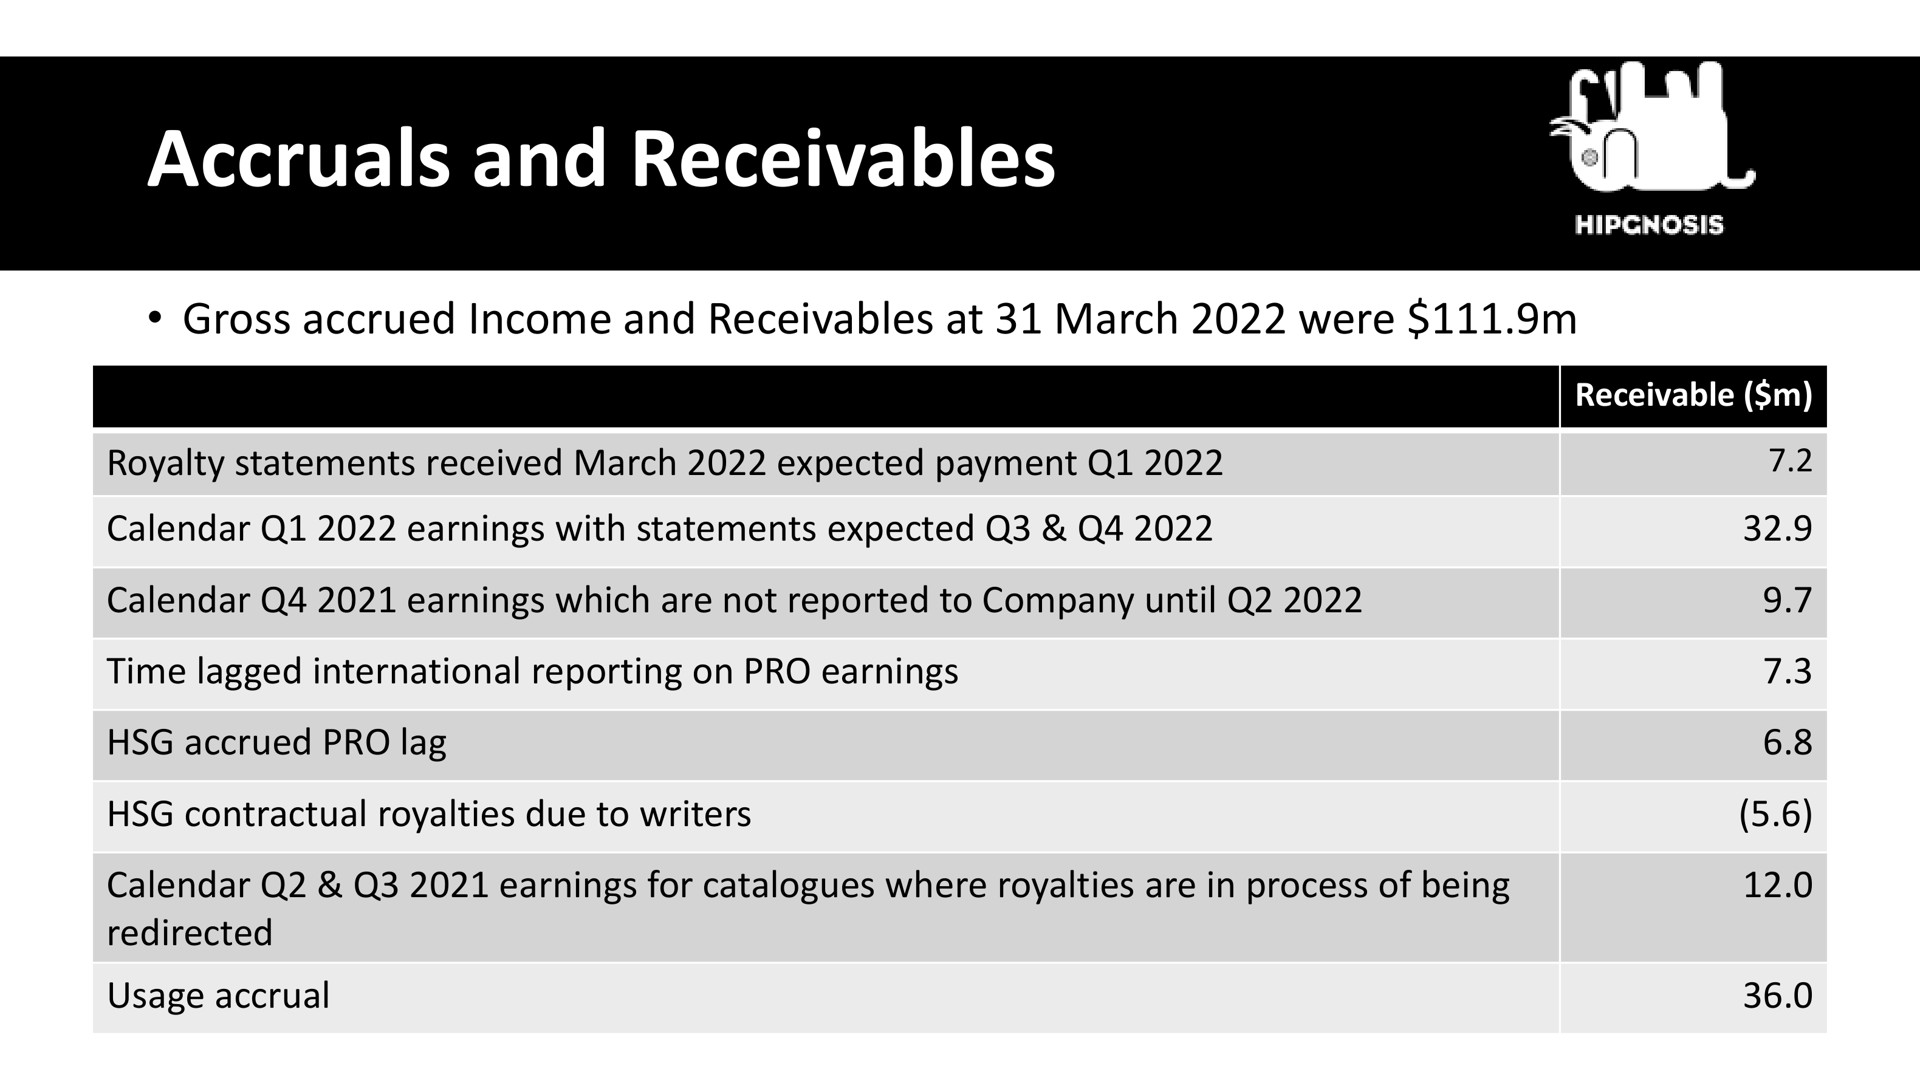 accruals and receivables | Hipgnosis Songs Fund